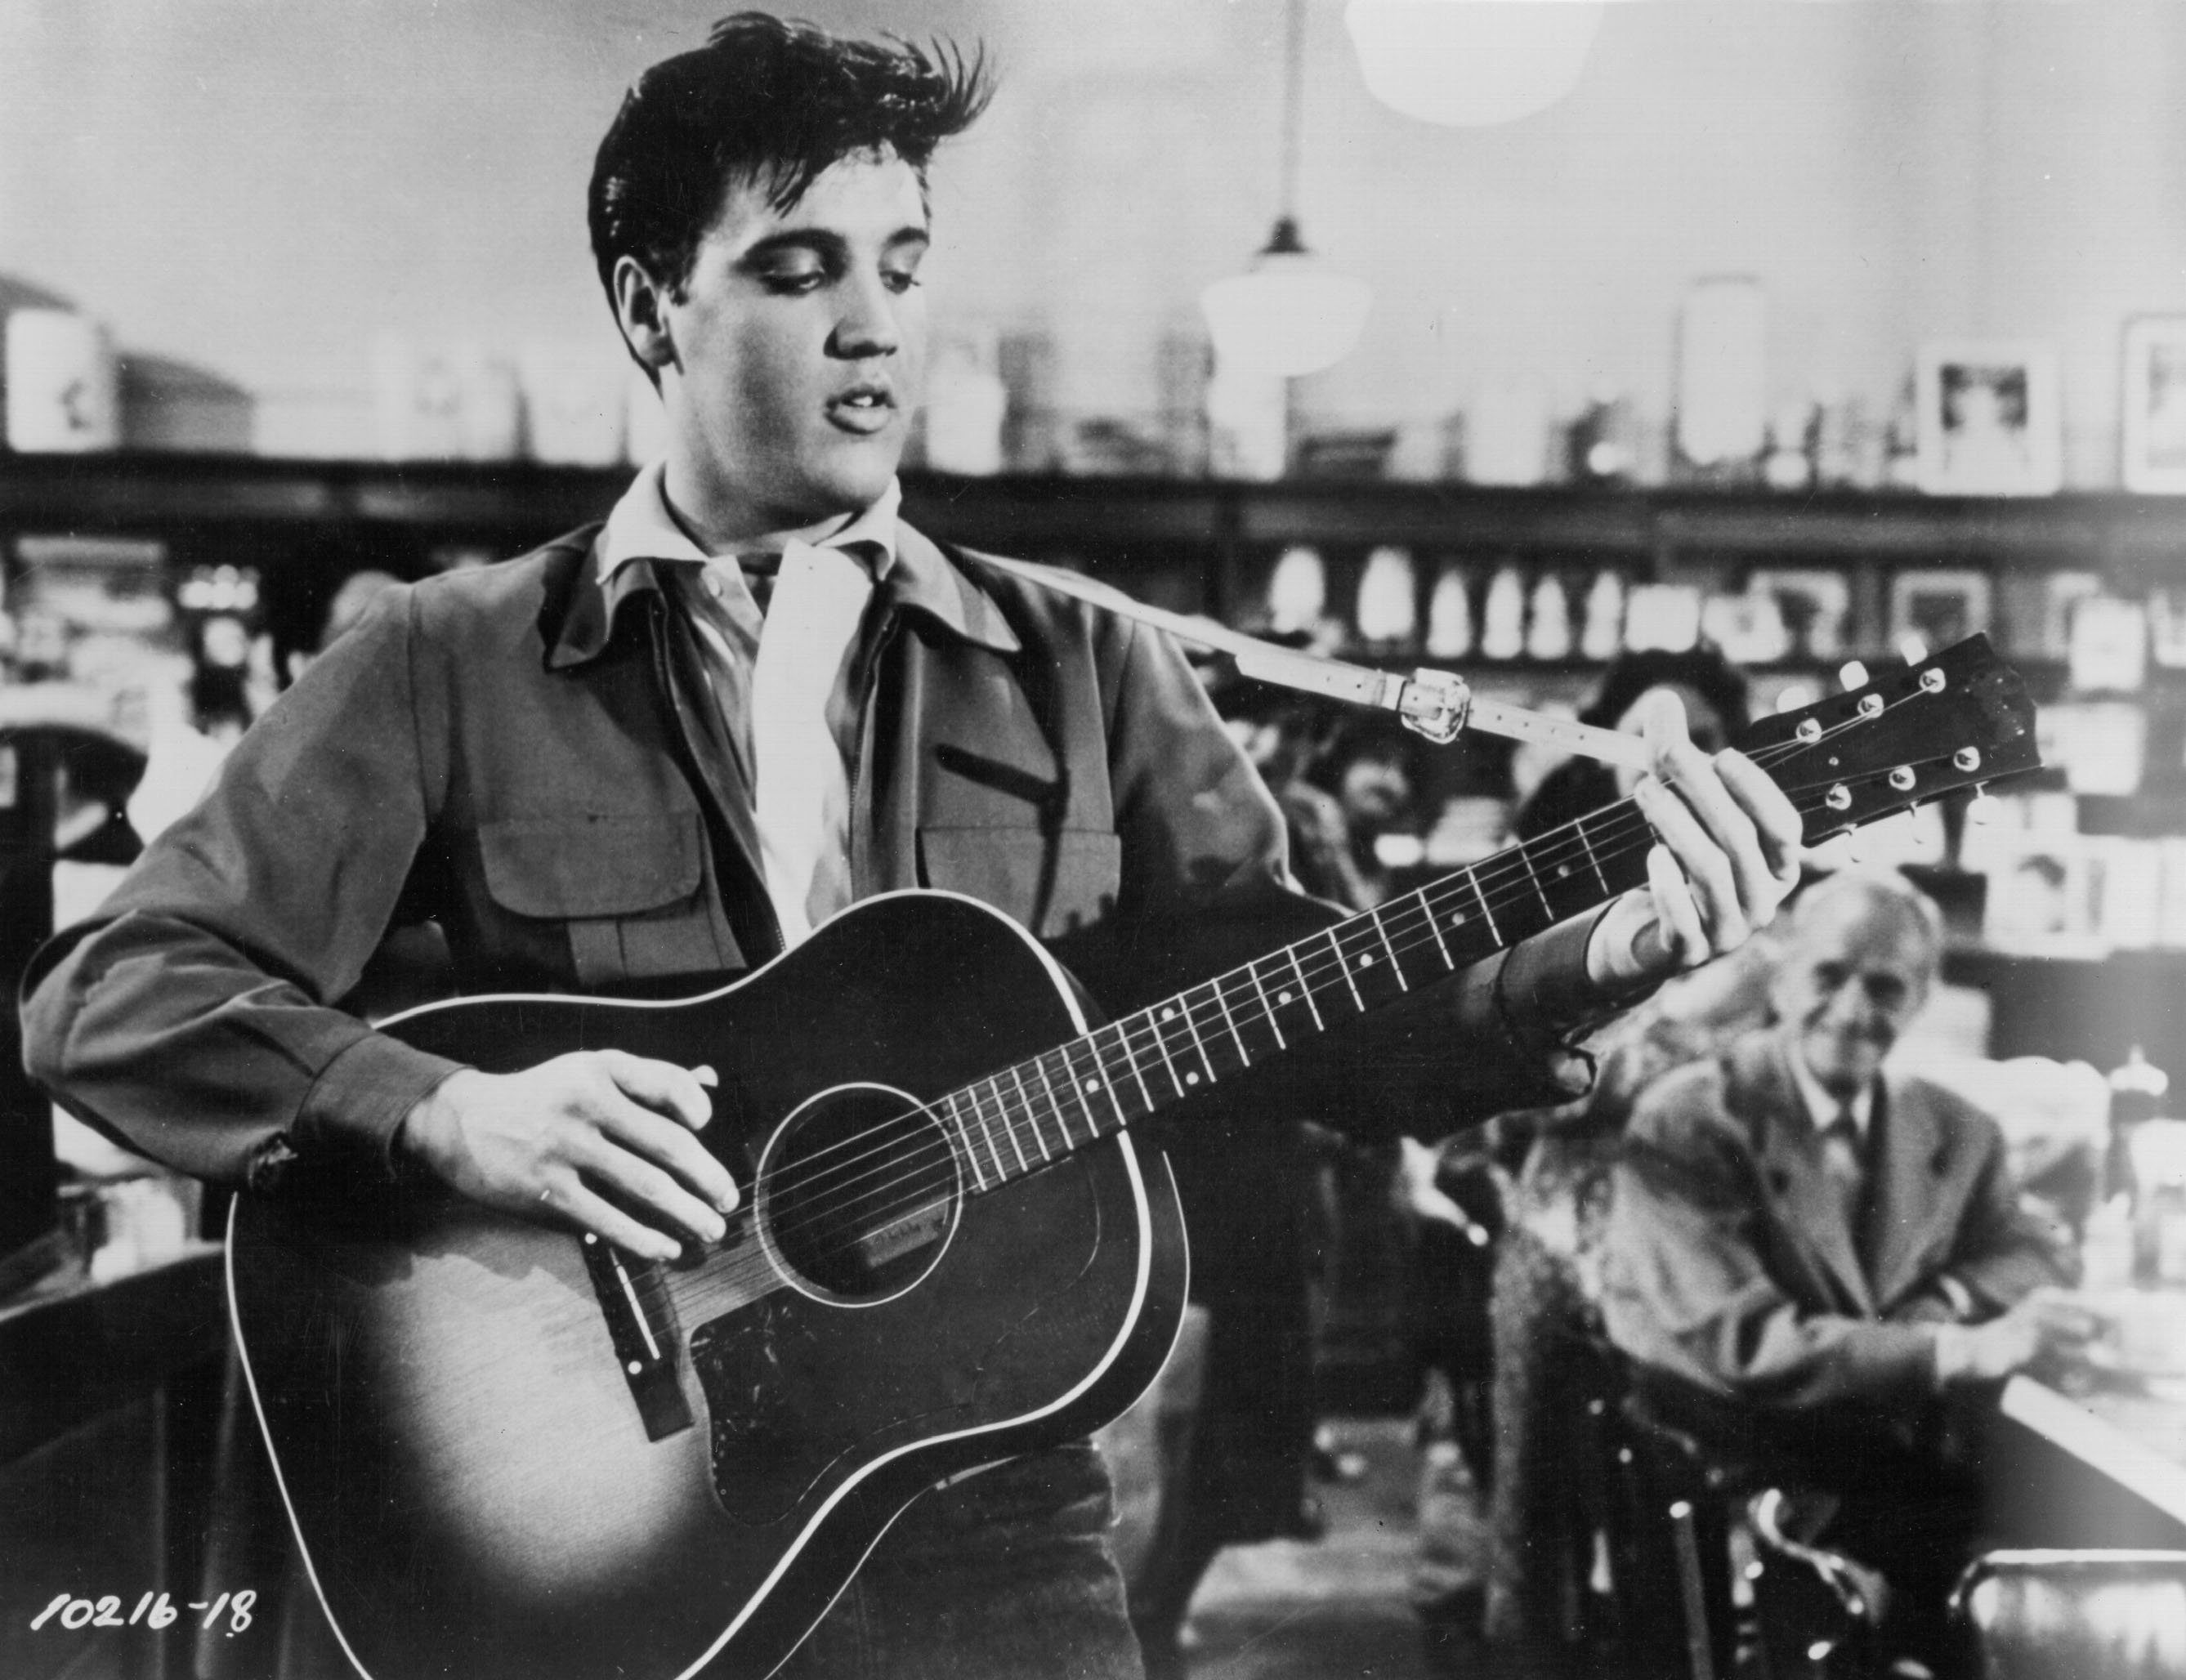 Elvis Presley performing a song on a guitar